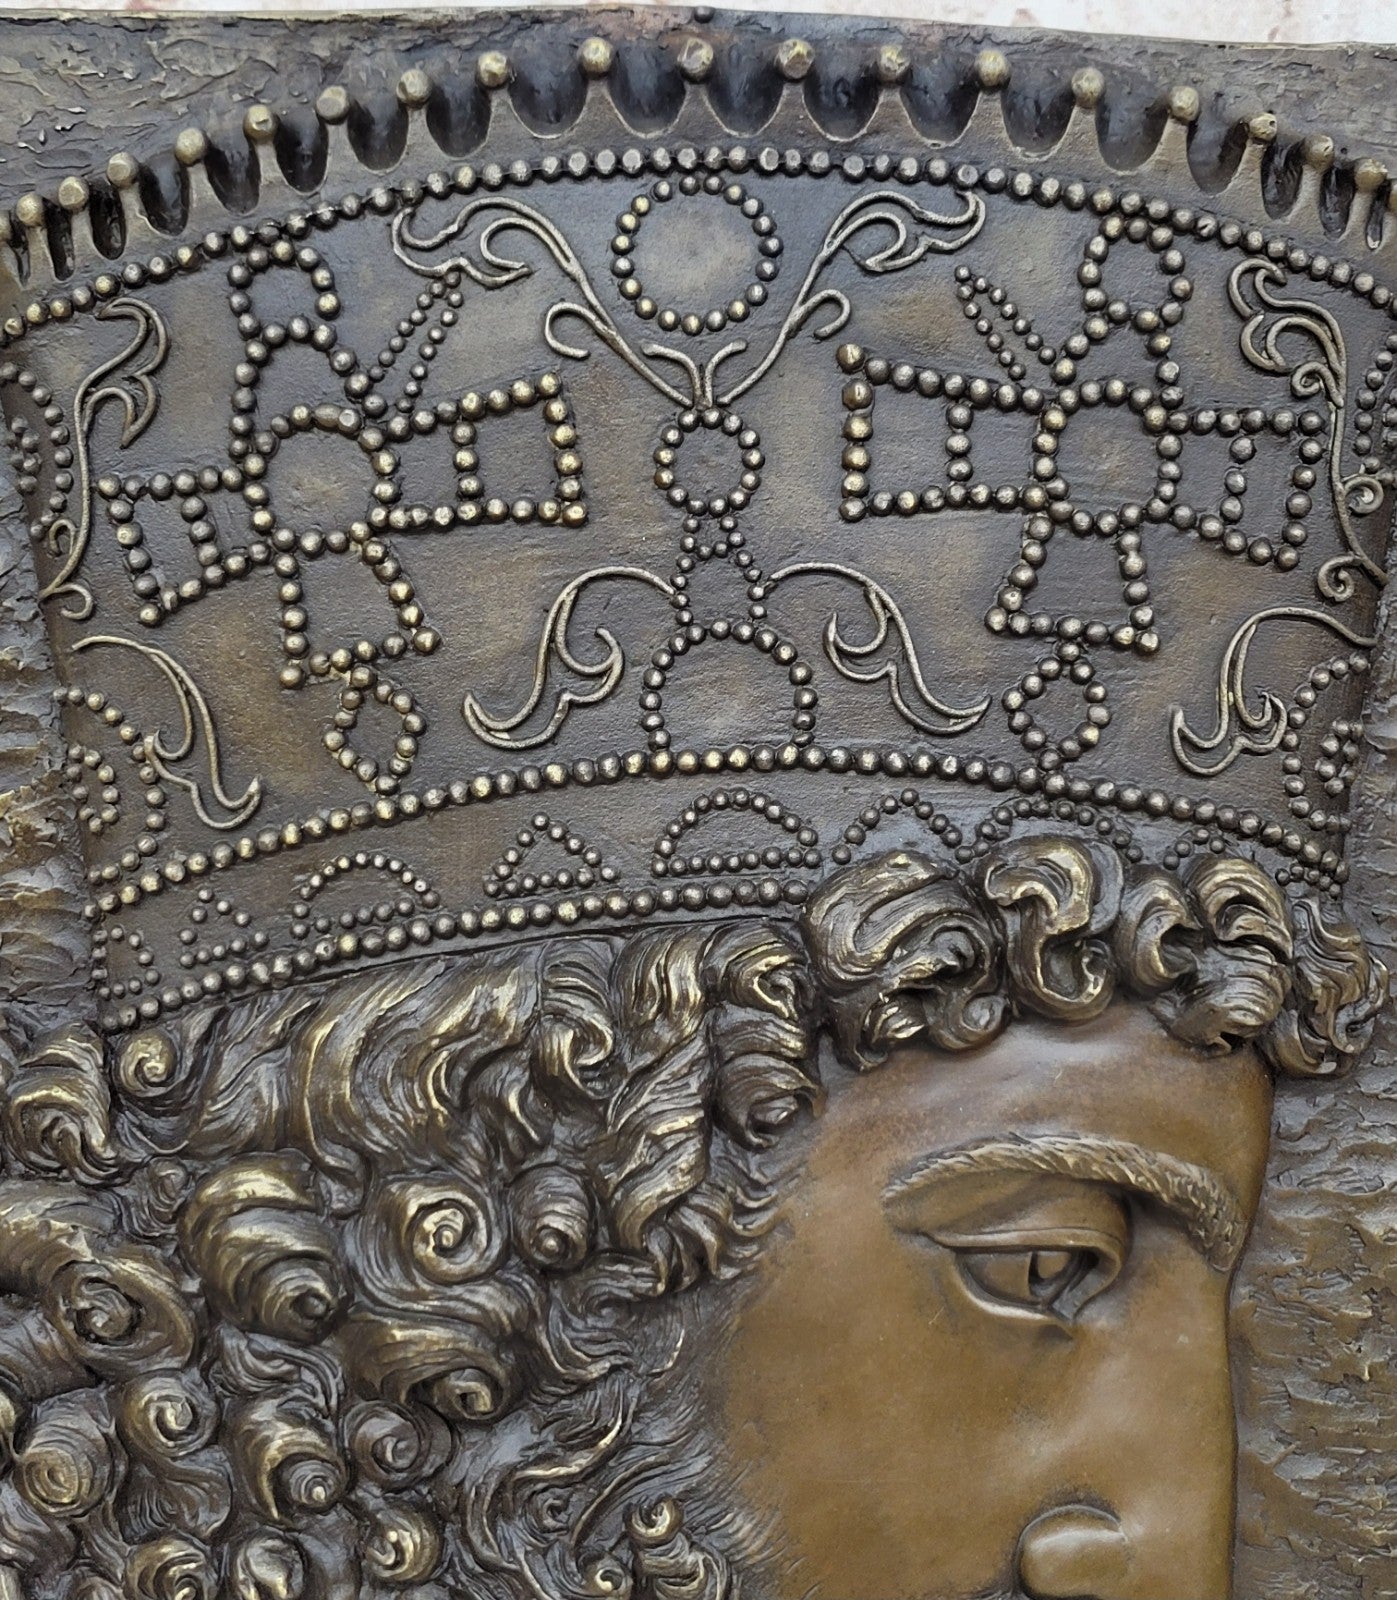 Vintage Artwork: Wall-Mounted Bronze Sculpture Depicting Cyrus The Great of Persia